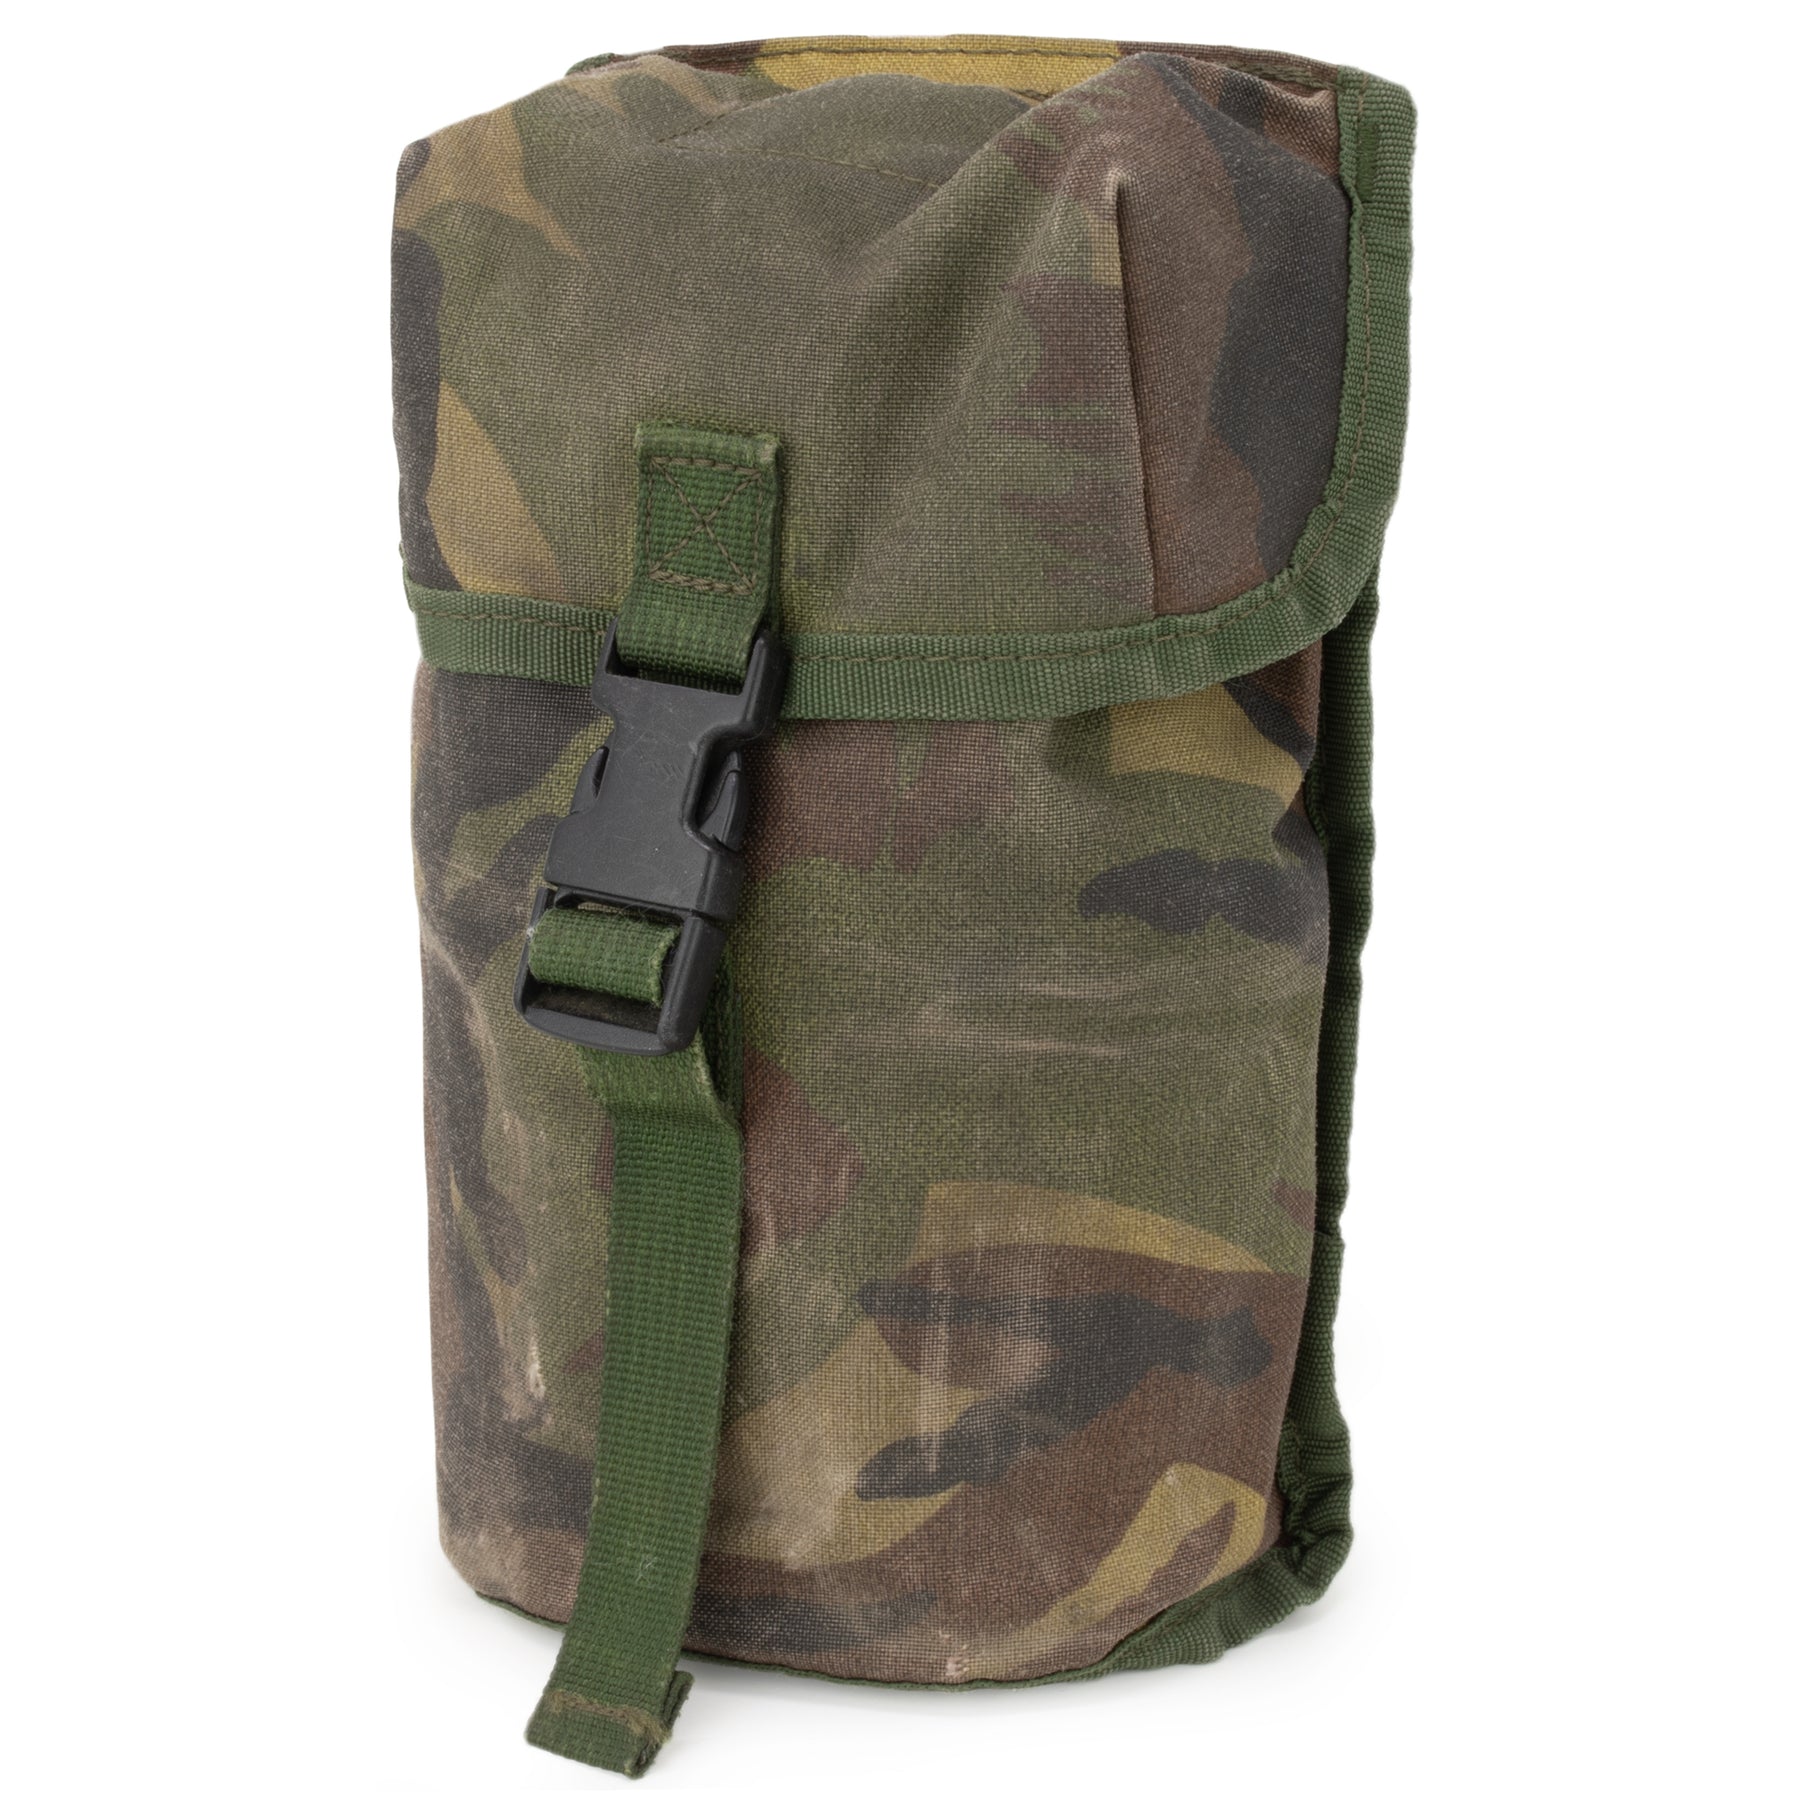 Dutch Canteen & Cup With Woodland MOLLE Cover